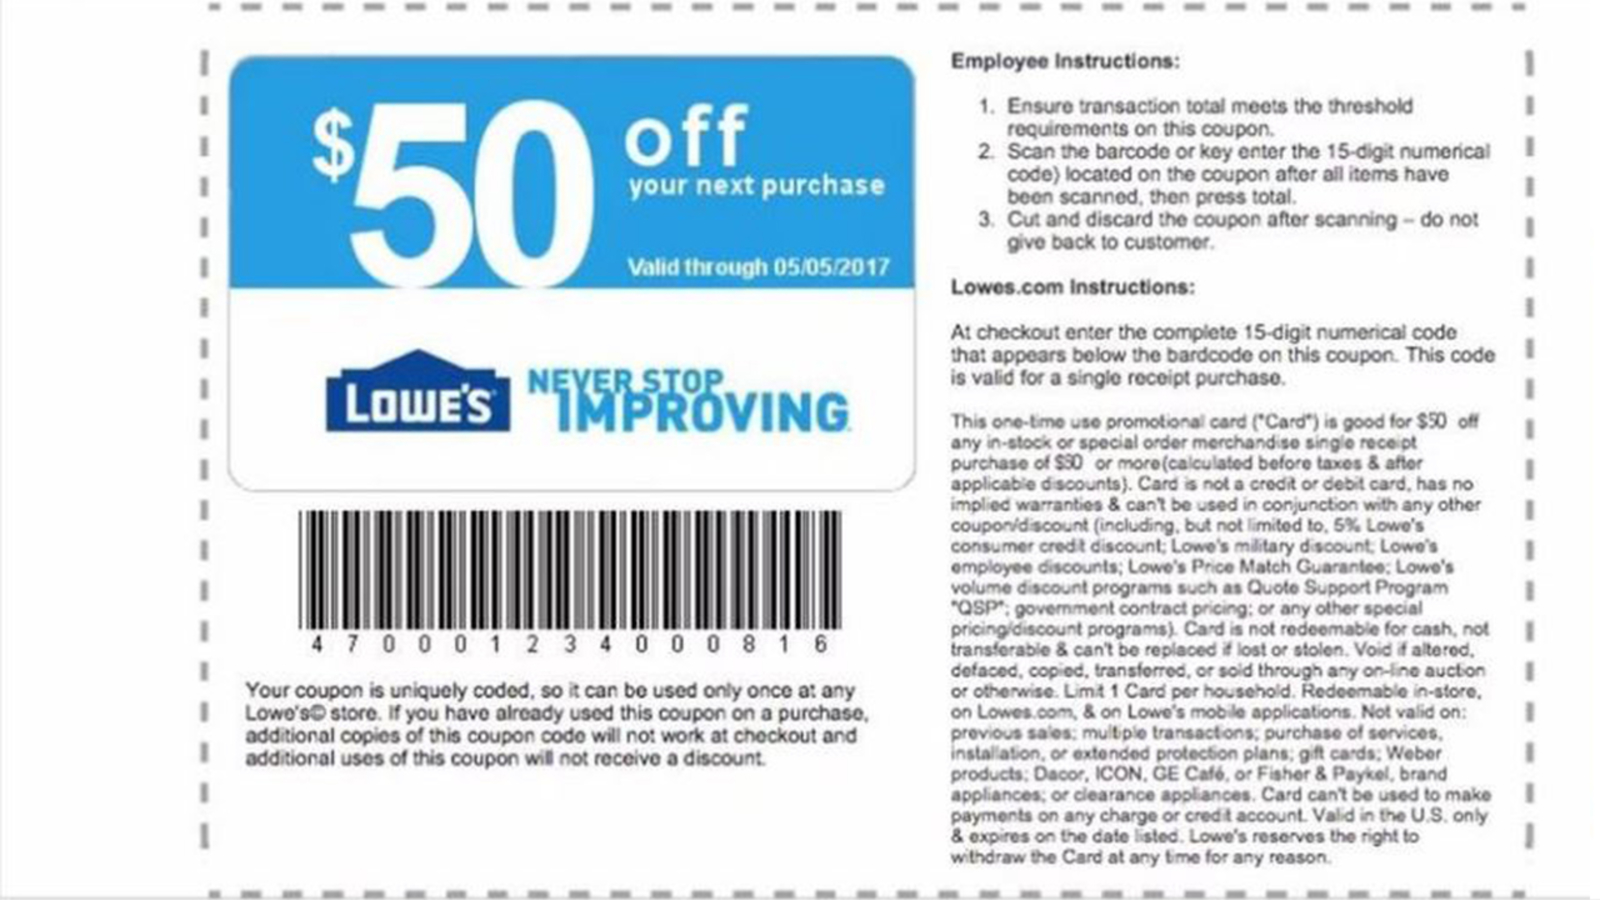 How to use the lowes coupon correctly online